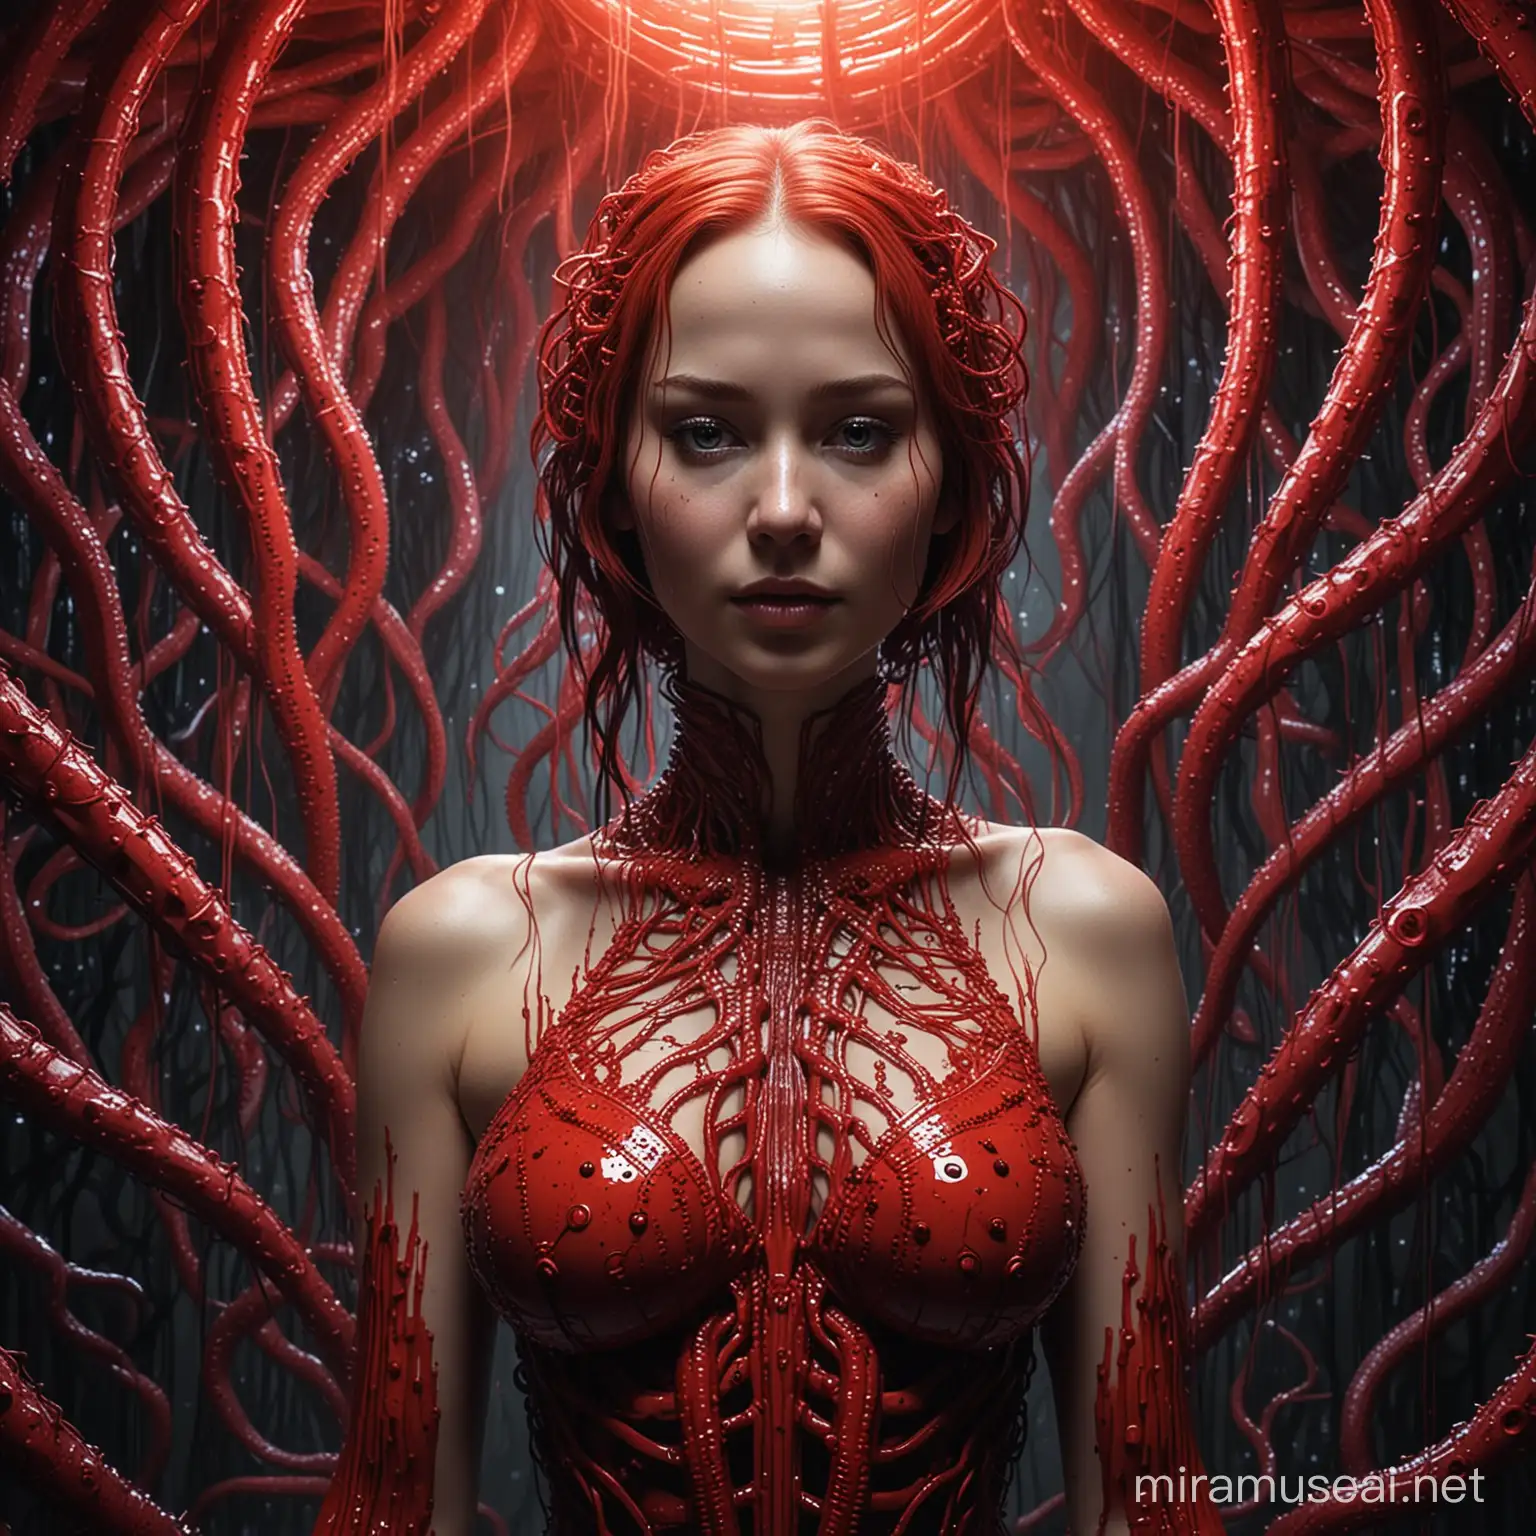 jennifer lawrence is modern day muses, perfect symmetry, post-processing, her body controlled by many tentacles. alien nest background. glowing lights, powerful gestures, highly detailed attributes, full body shot. dramatic red lighting, masterpiece, masterpiece, stunning, flawless structure, perfection, giger style. bitmap rasterize, t-shirts design style, intricate to detail anime aesthetic, pulp comics, heavy chiaroscuro, yayoi kusama, becky cloonan, giger style